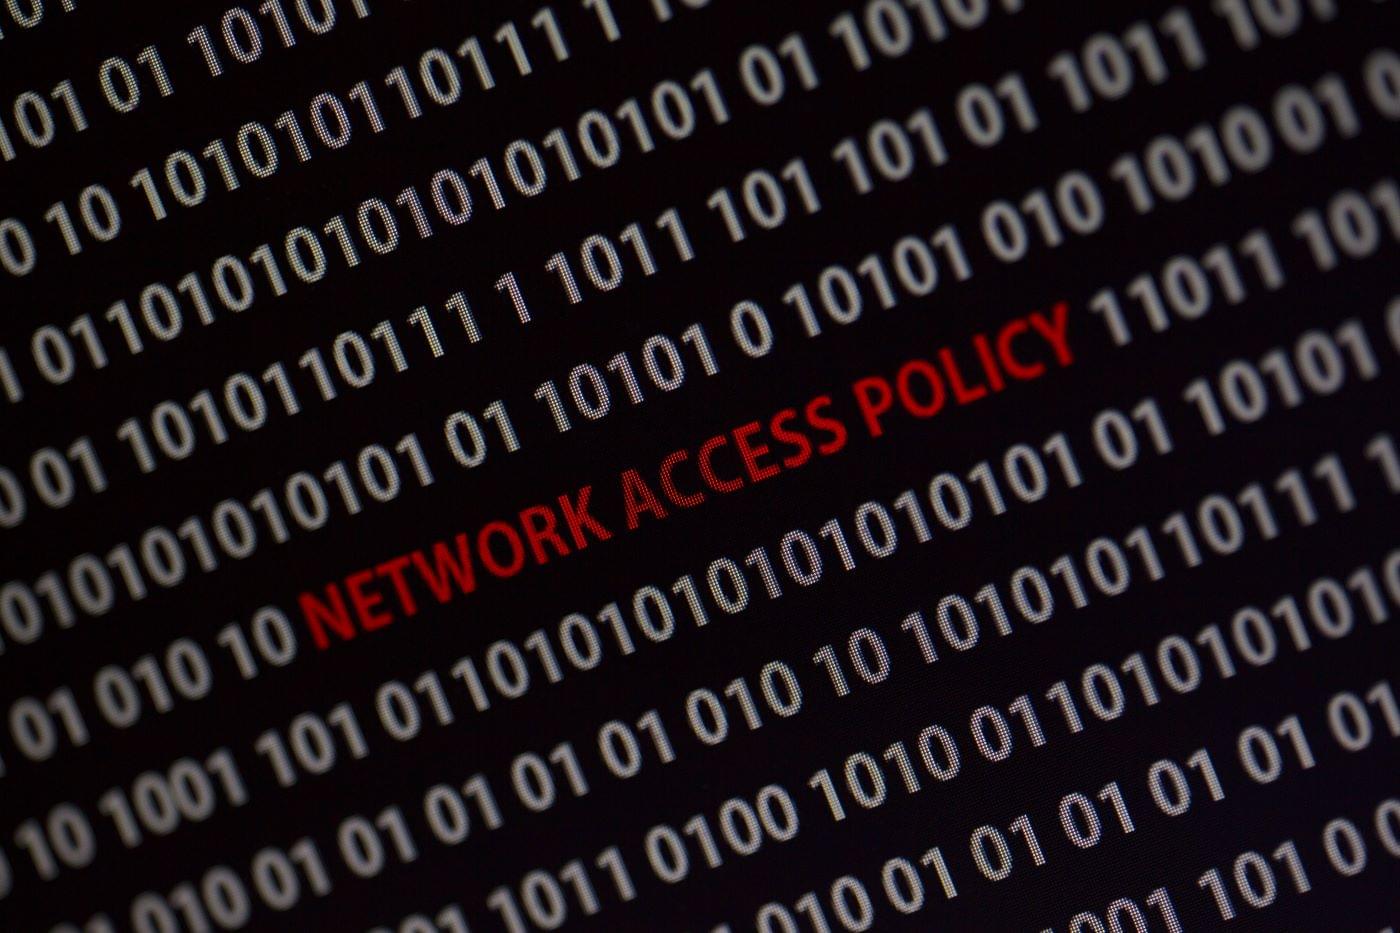 1s and 0s surrounding the words "Network Access Policy" for zero trust.